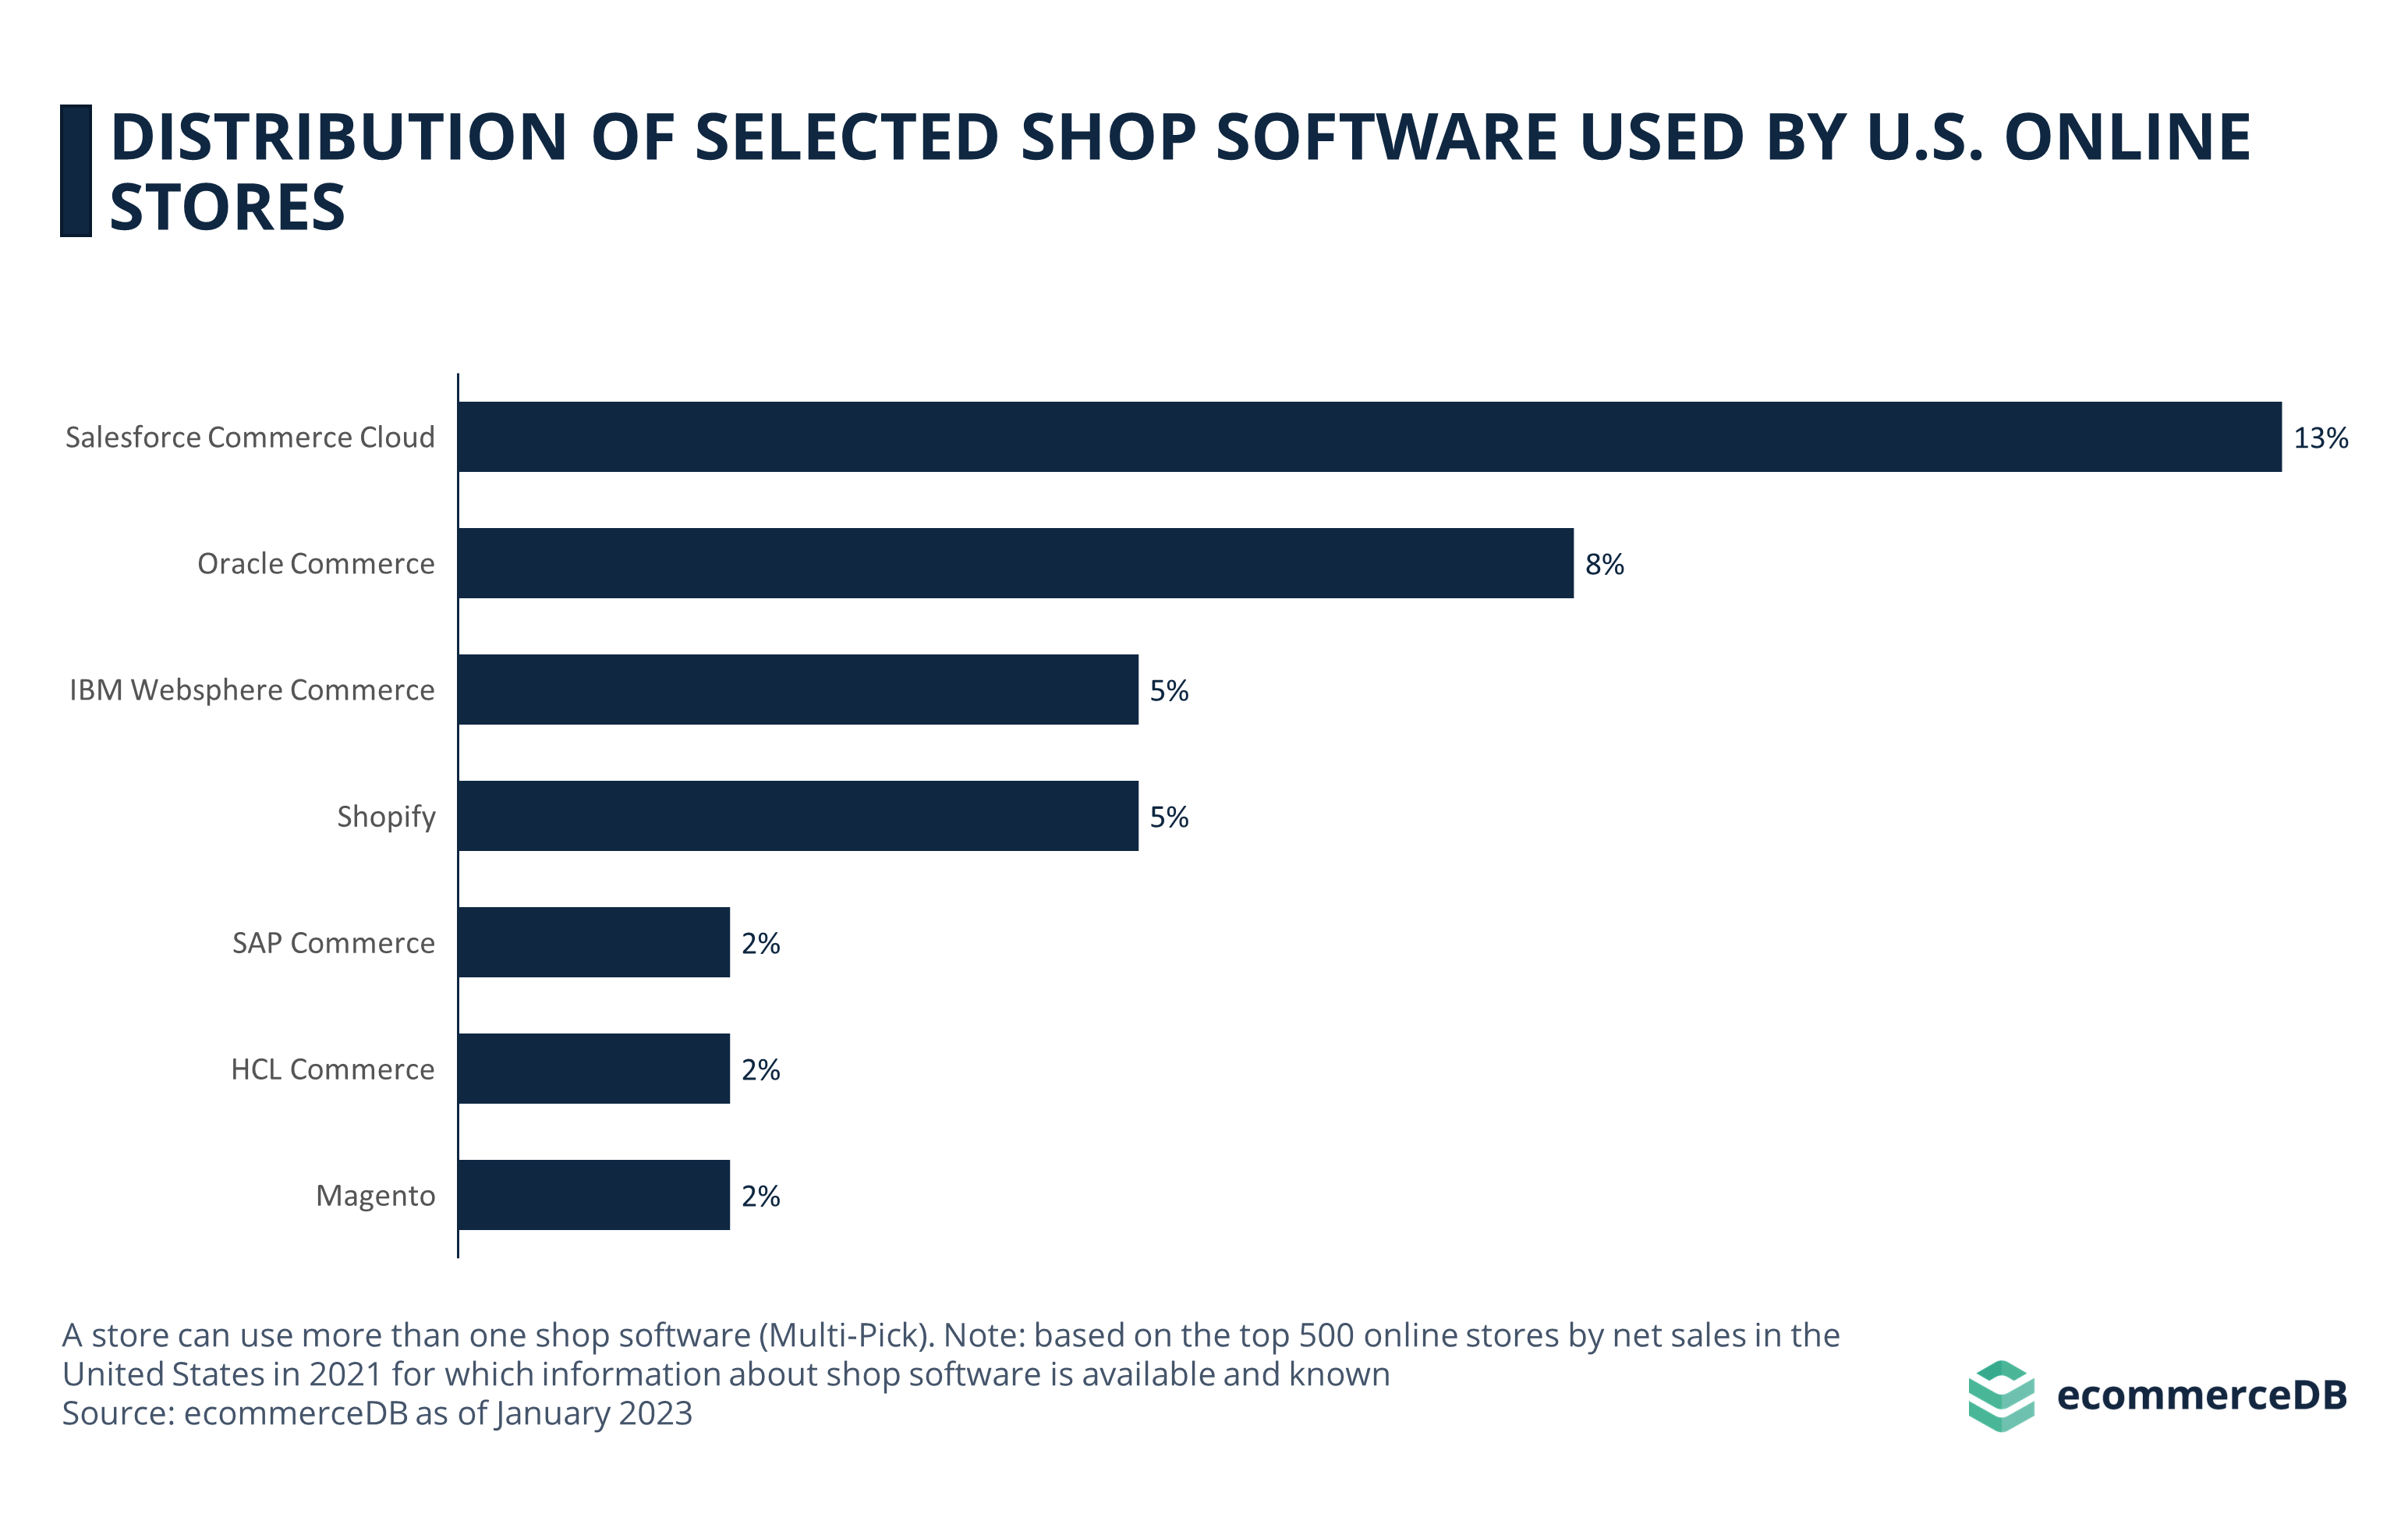 Distribution of Selected Shop Software Used by U.S. Online Stores